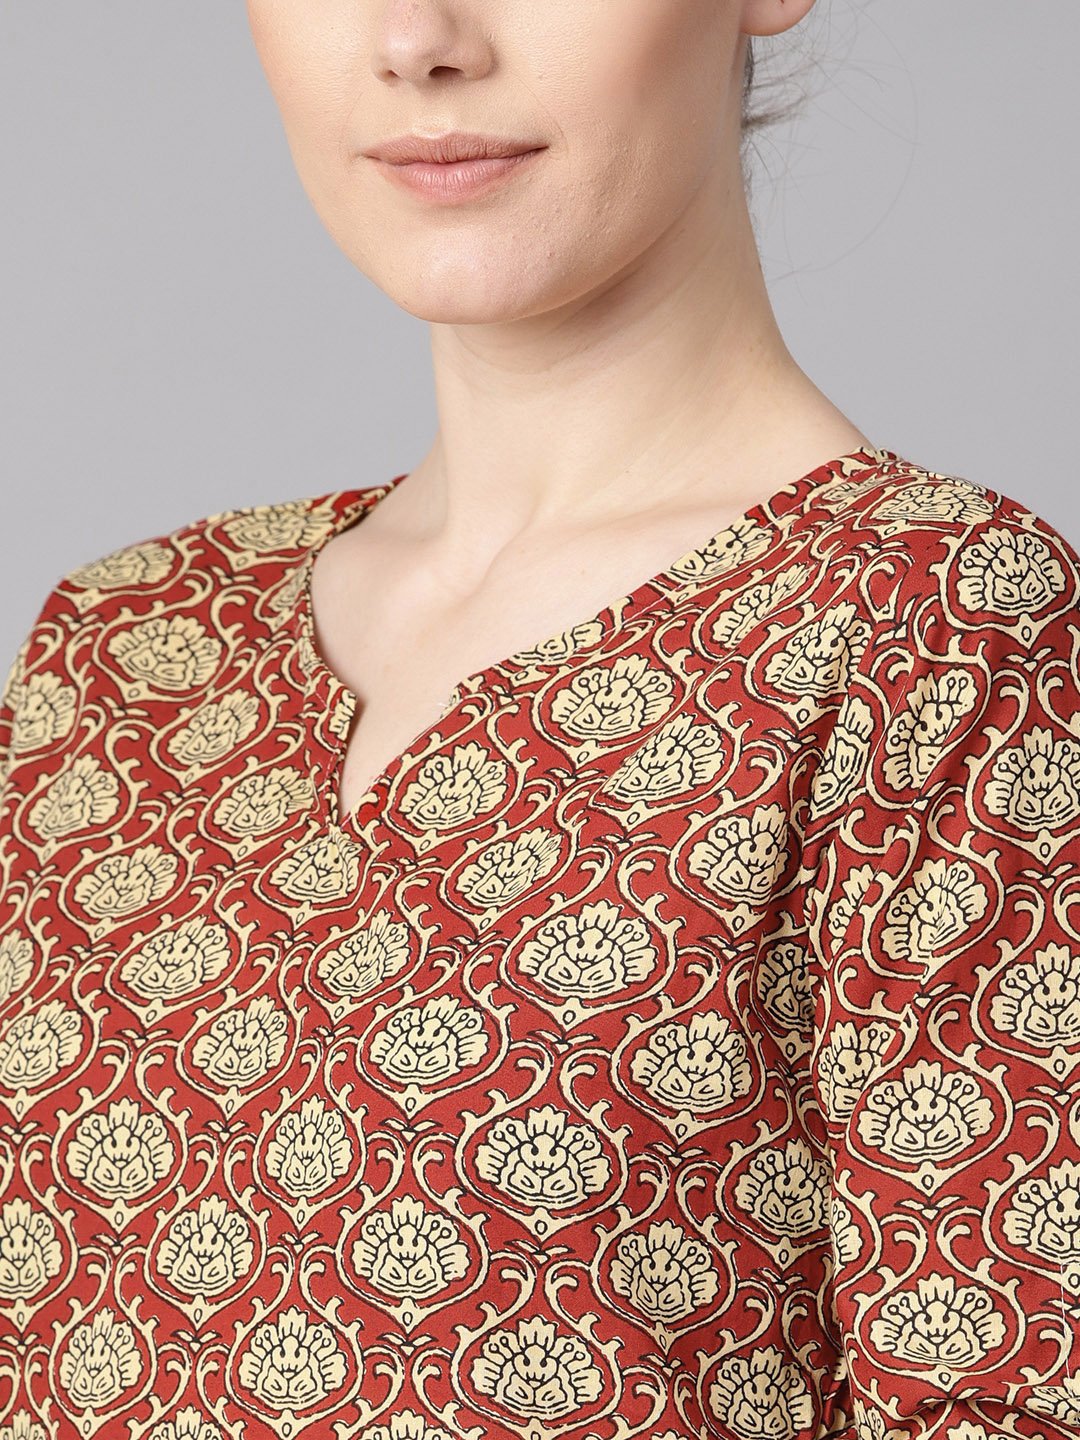 Women's Maroon Floral Printed Kurta With Draw String Detailed Sleeves And Pale Yellow Pants - Nayo Clothing